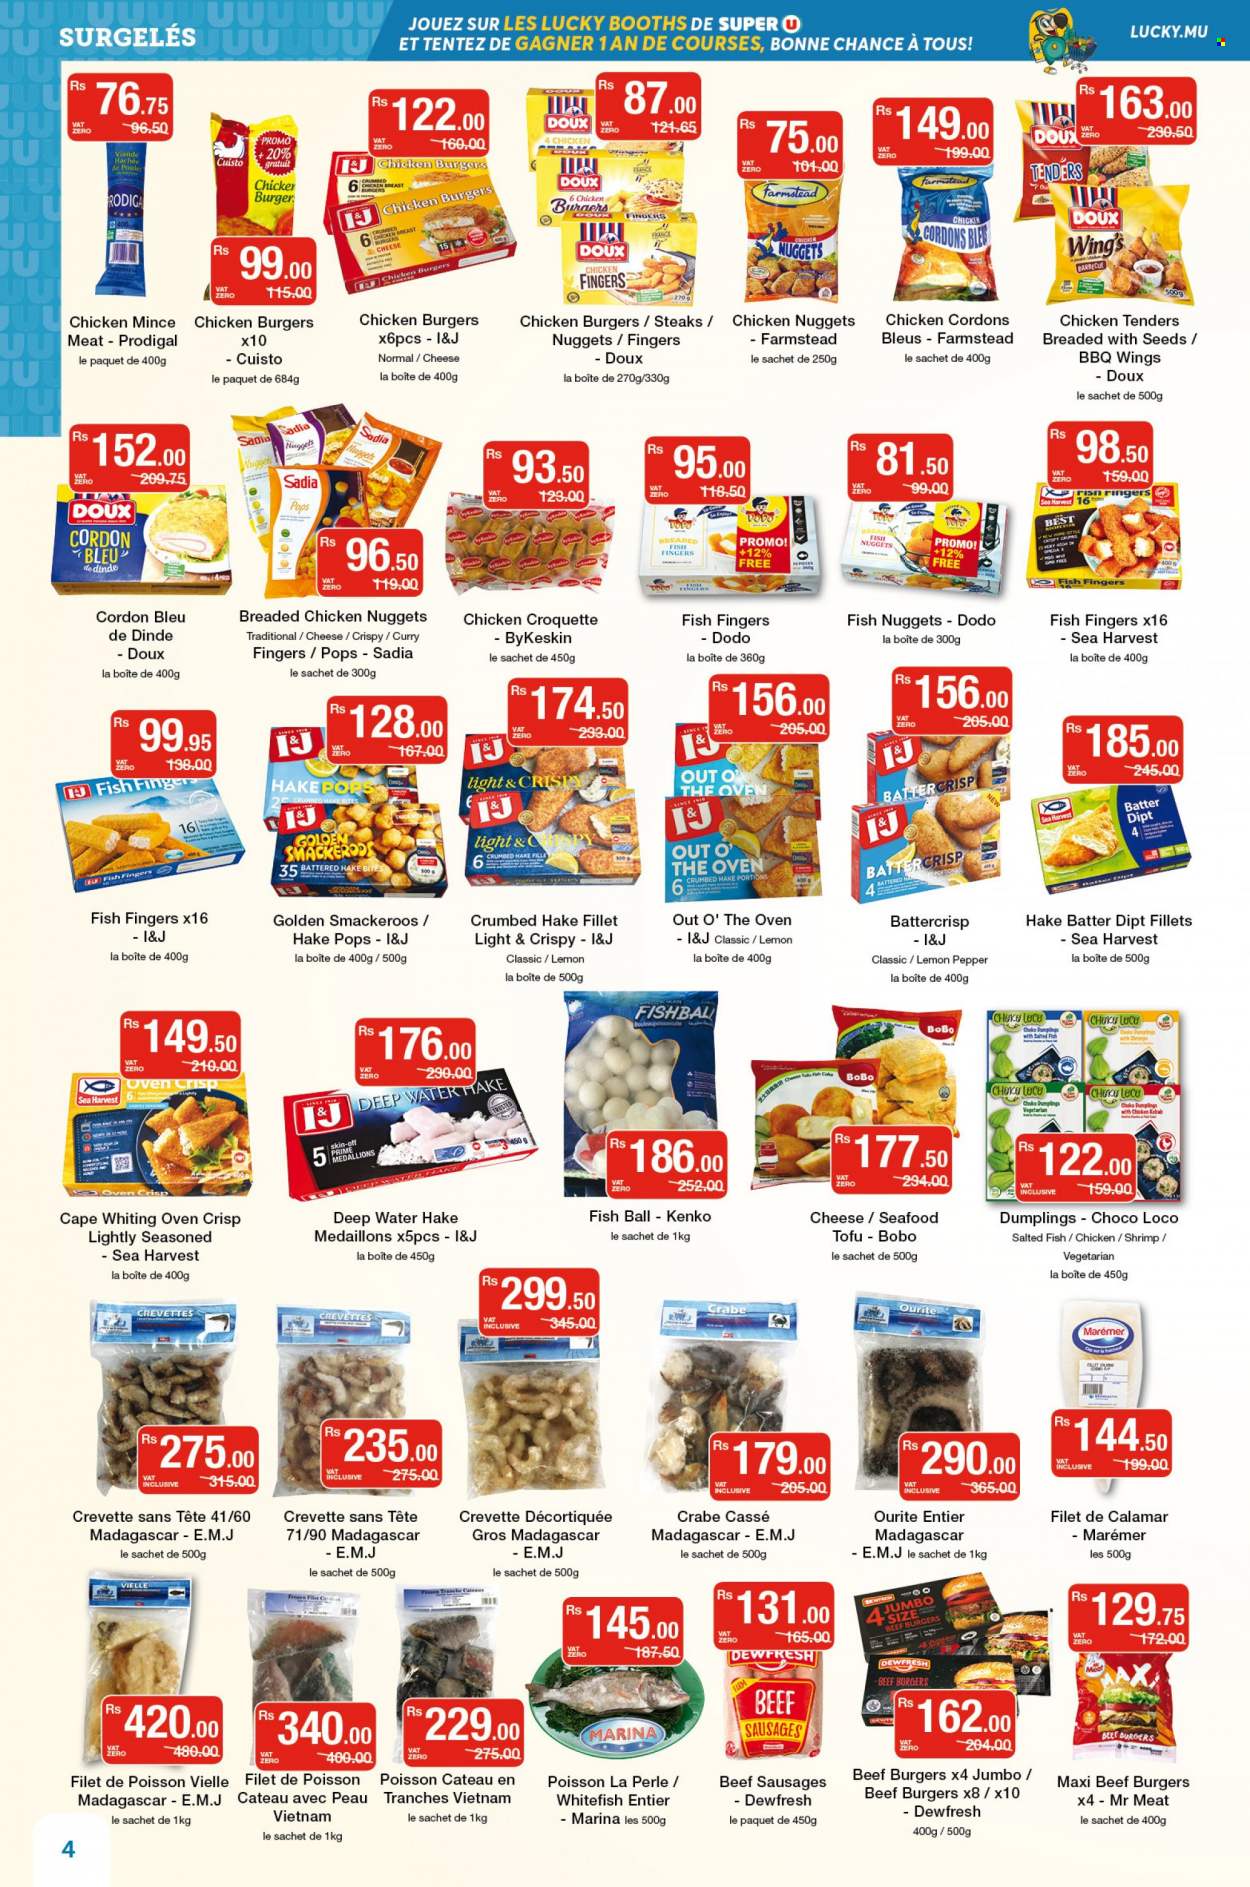 Super U Catalogue - 23.09.2022 - 6.10.2022 - Sales products - bread, cake, chayote, whitefish, seafood, hake, shrimps, fish nuggets, fish fingers, whiting, Sea Harvest, fish sticks, chicken tenders, hamburger, fried chicken, chicken nuggets, dumpling, chicken kebabs, beef burger, breaded fish, Out o' the Oven, sausage, beef sausages, cheese, tofu, fish cake, Dove, ground chicken, chicken meat, steak, cordon bleu. Page 4.